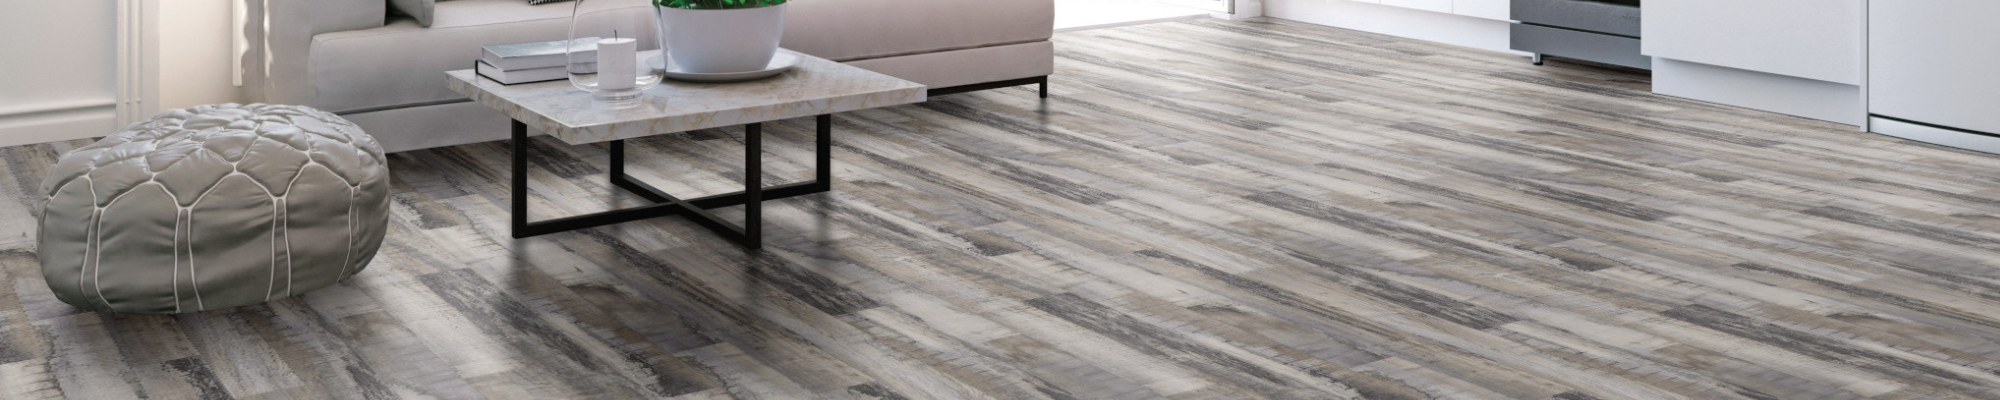 Find a variety of beautiful Vinyl flooring in all shapes, sizes, styles and colors at your local store, SELECT FLOORS LTD in Okotoks